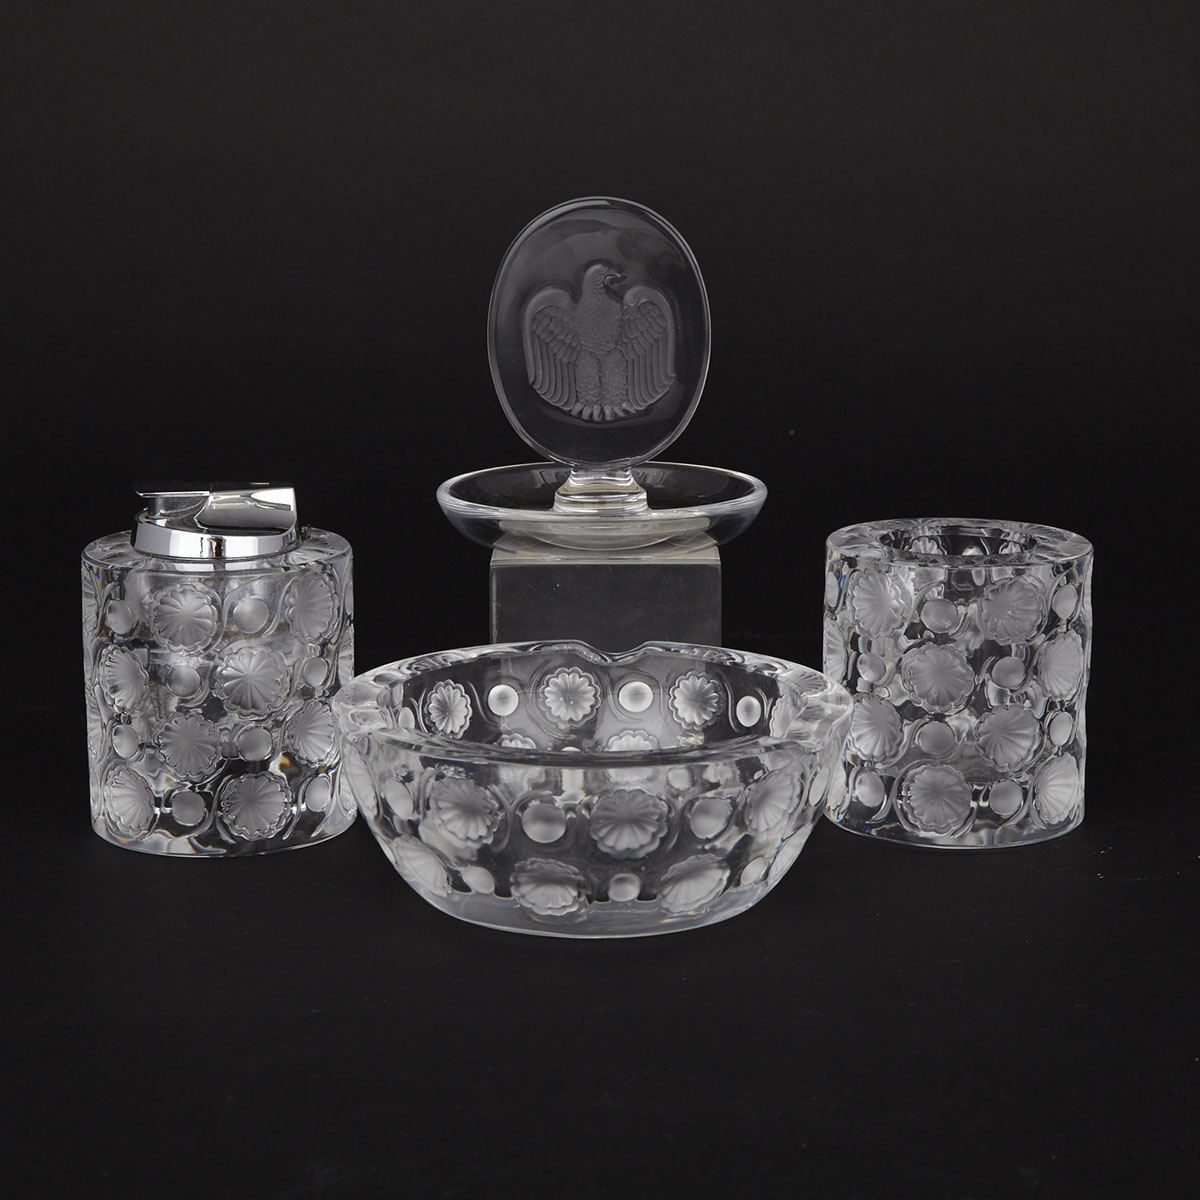 ‘Tokio’, Lalique Moulded and Frosted Glass Smoker’s Set and ‘Eagle’ Ring Tray, 20th century